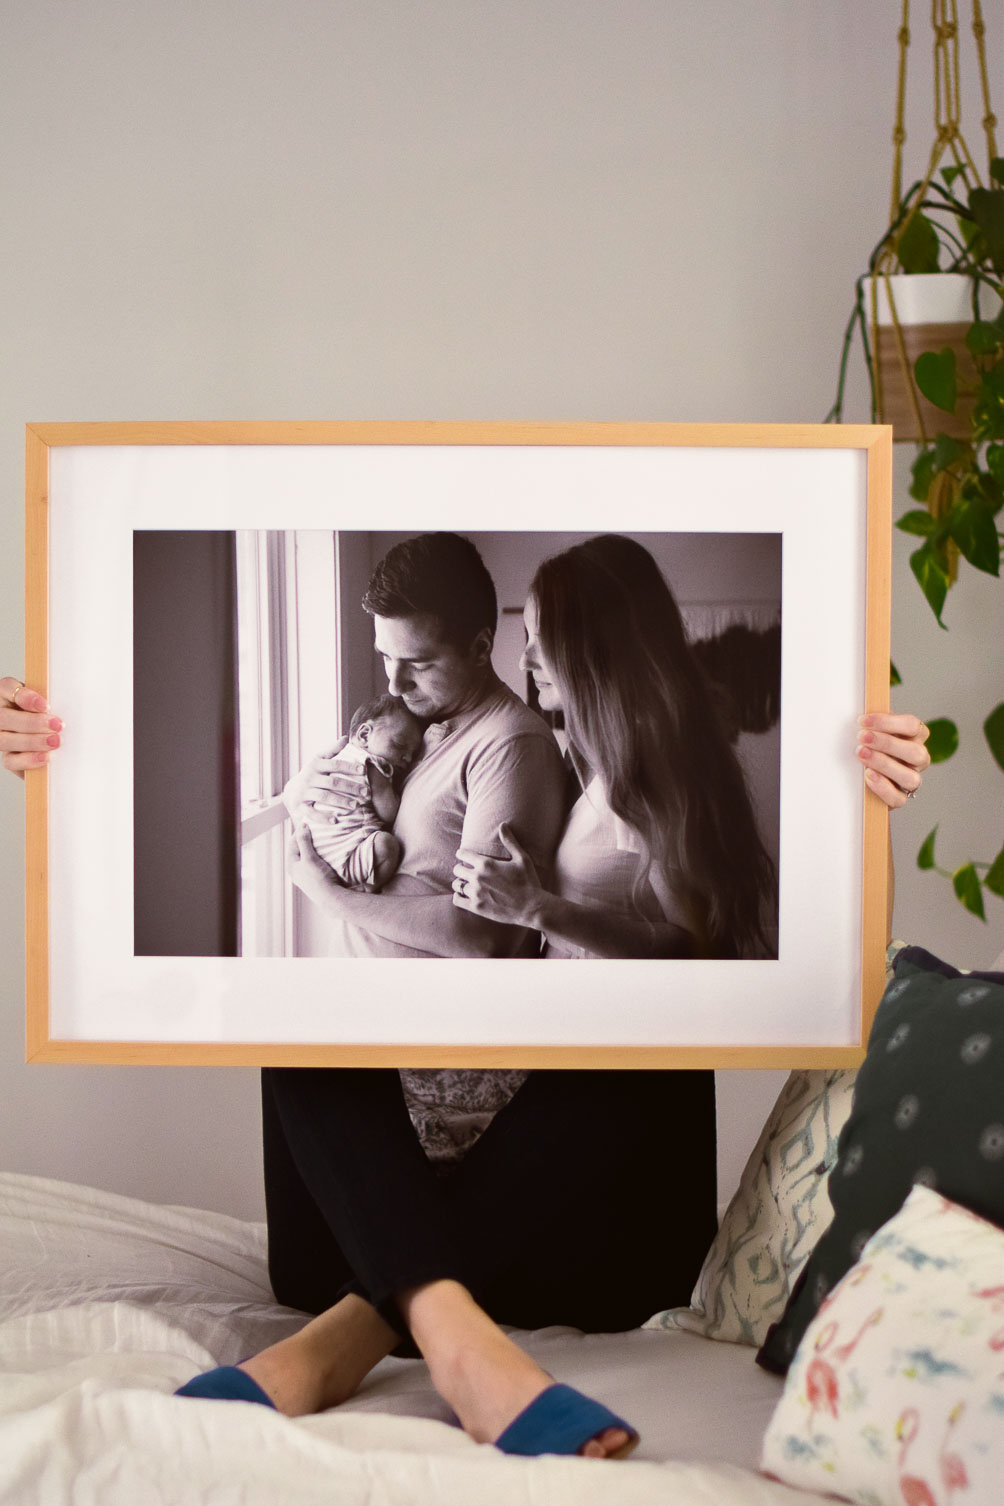 sharing how we used the custom design Framebridge services to display our newborn photos on one brass fox